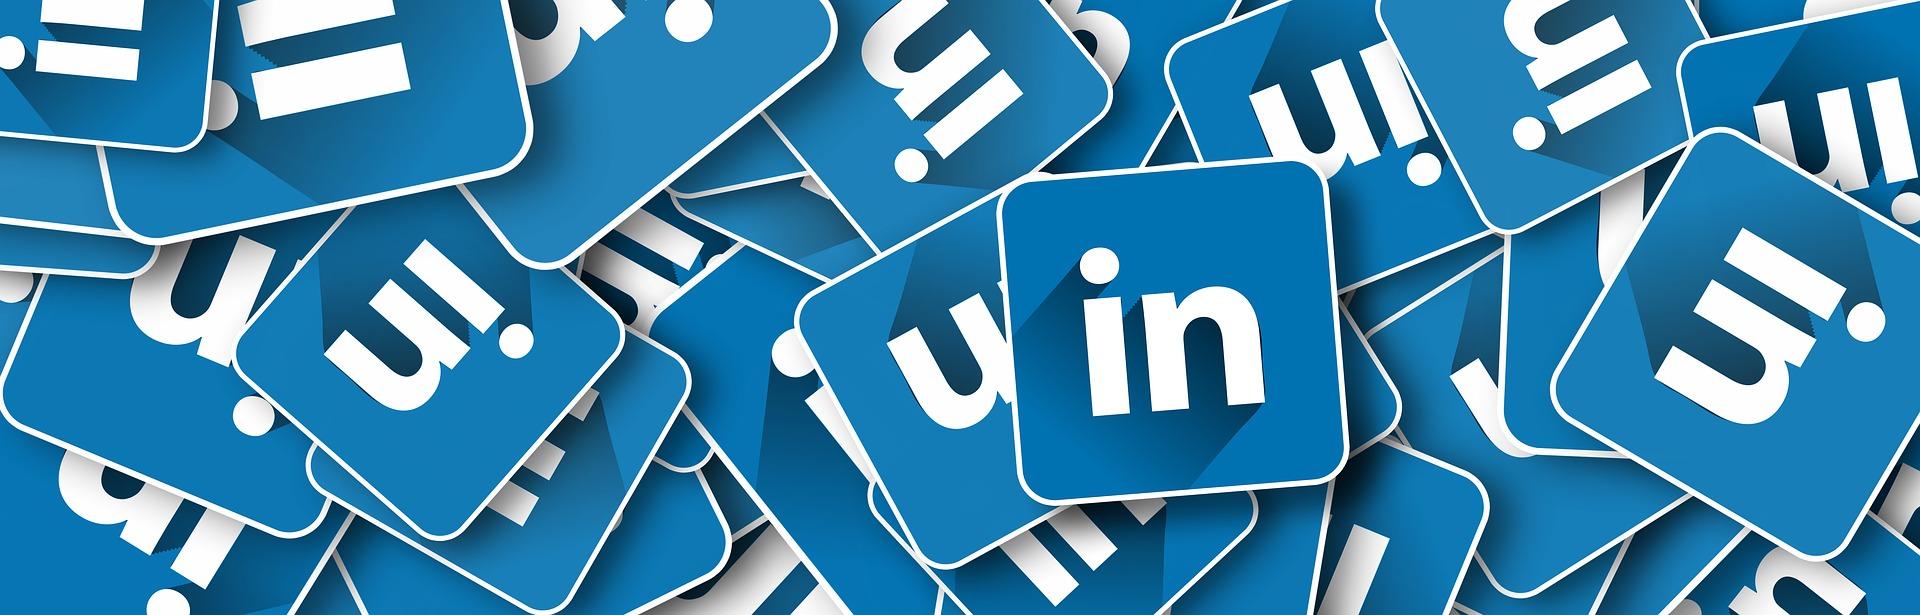 linkedin-continues-to-see-record-levels-of-engagement-revenue-up